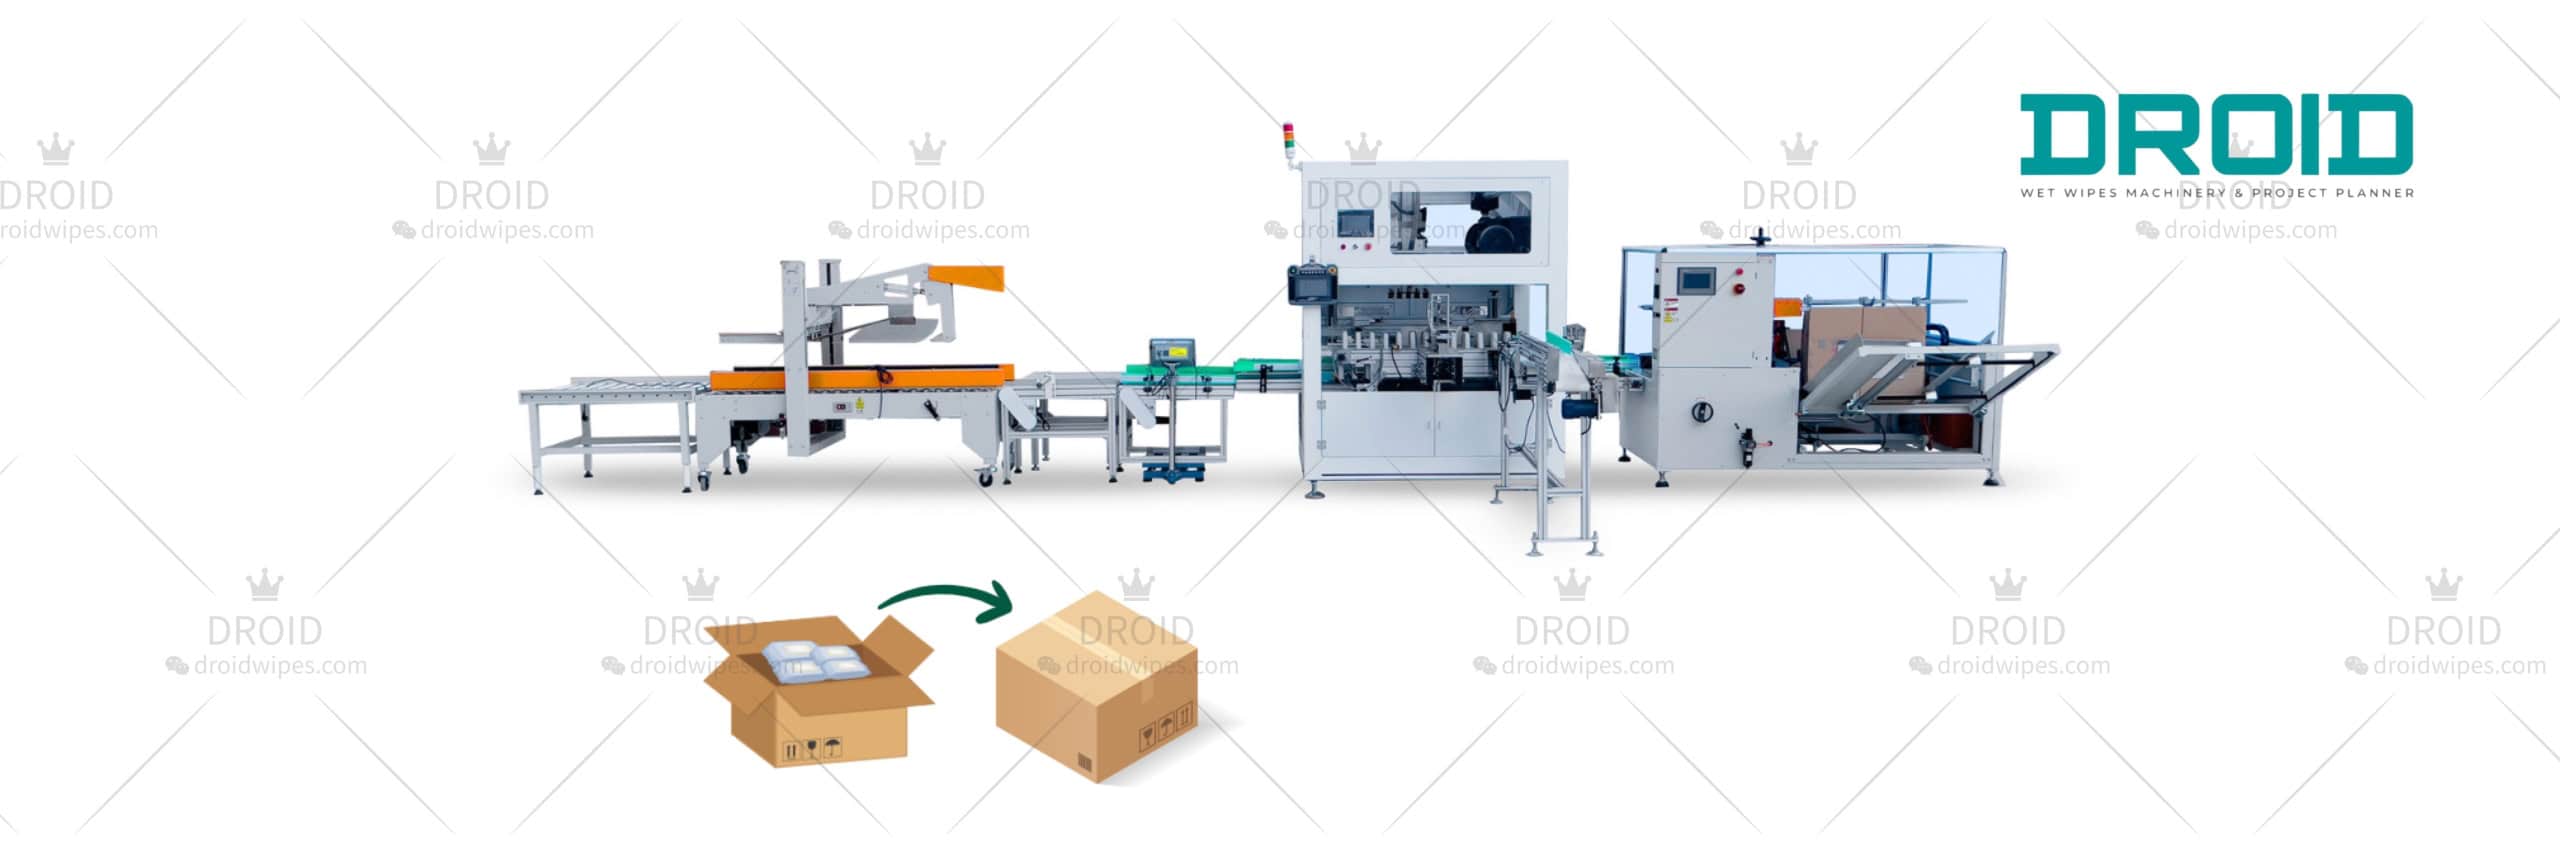 UT C300 Robotic Case Packer for Wet Wipes Production DROID  scaled - UT-FL4 Cross fold Wet Wipes Machine (5-40Wipes/pack)